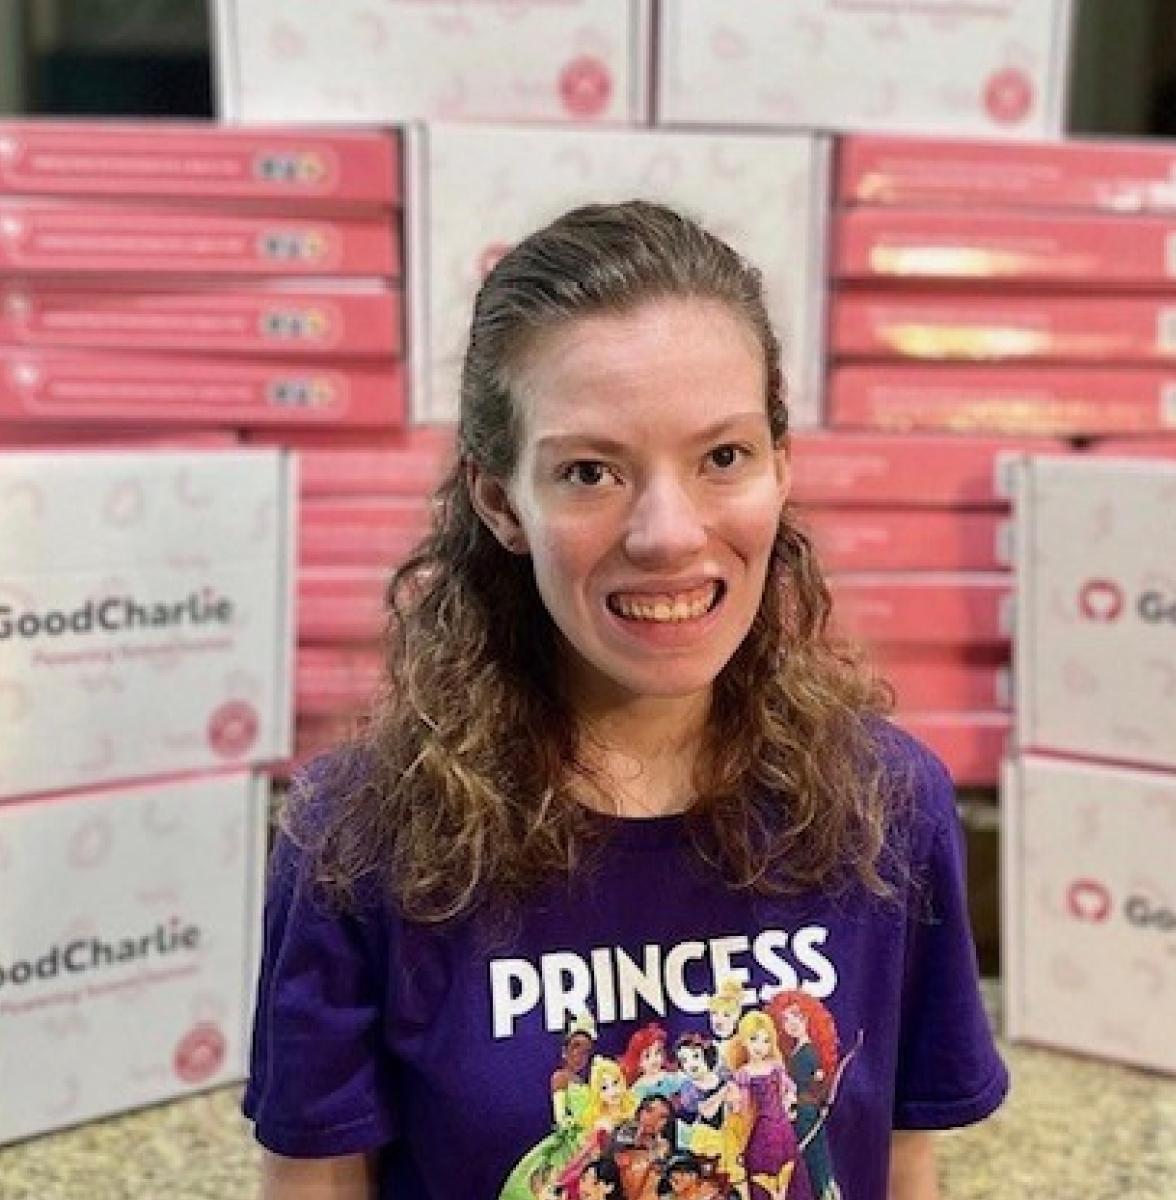 Jess is smiling, wearing a purple t-shirt with 'PRINCESS' inscribed in the front with a picture of Disney princesses. There are boxes of GoodCharlie treats in the background.